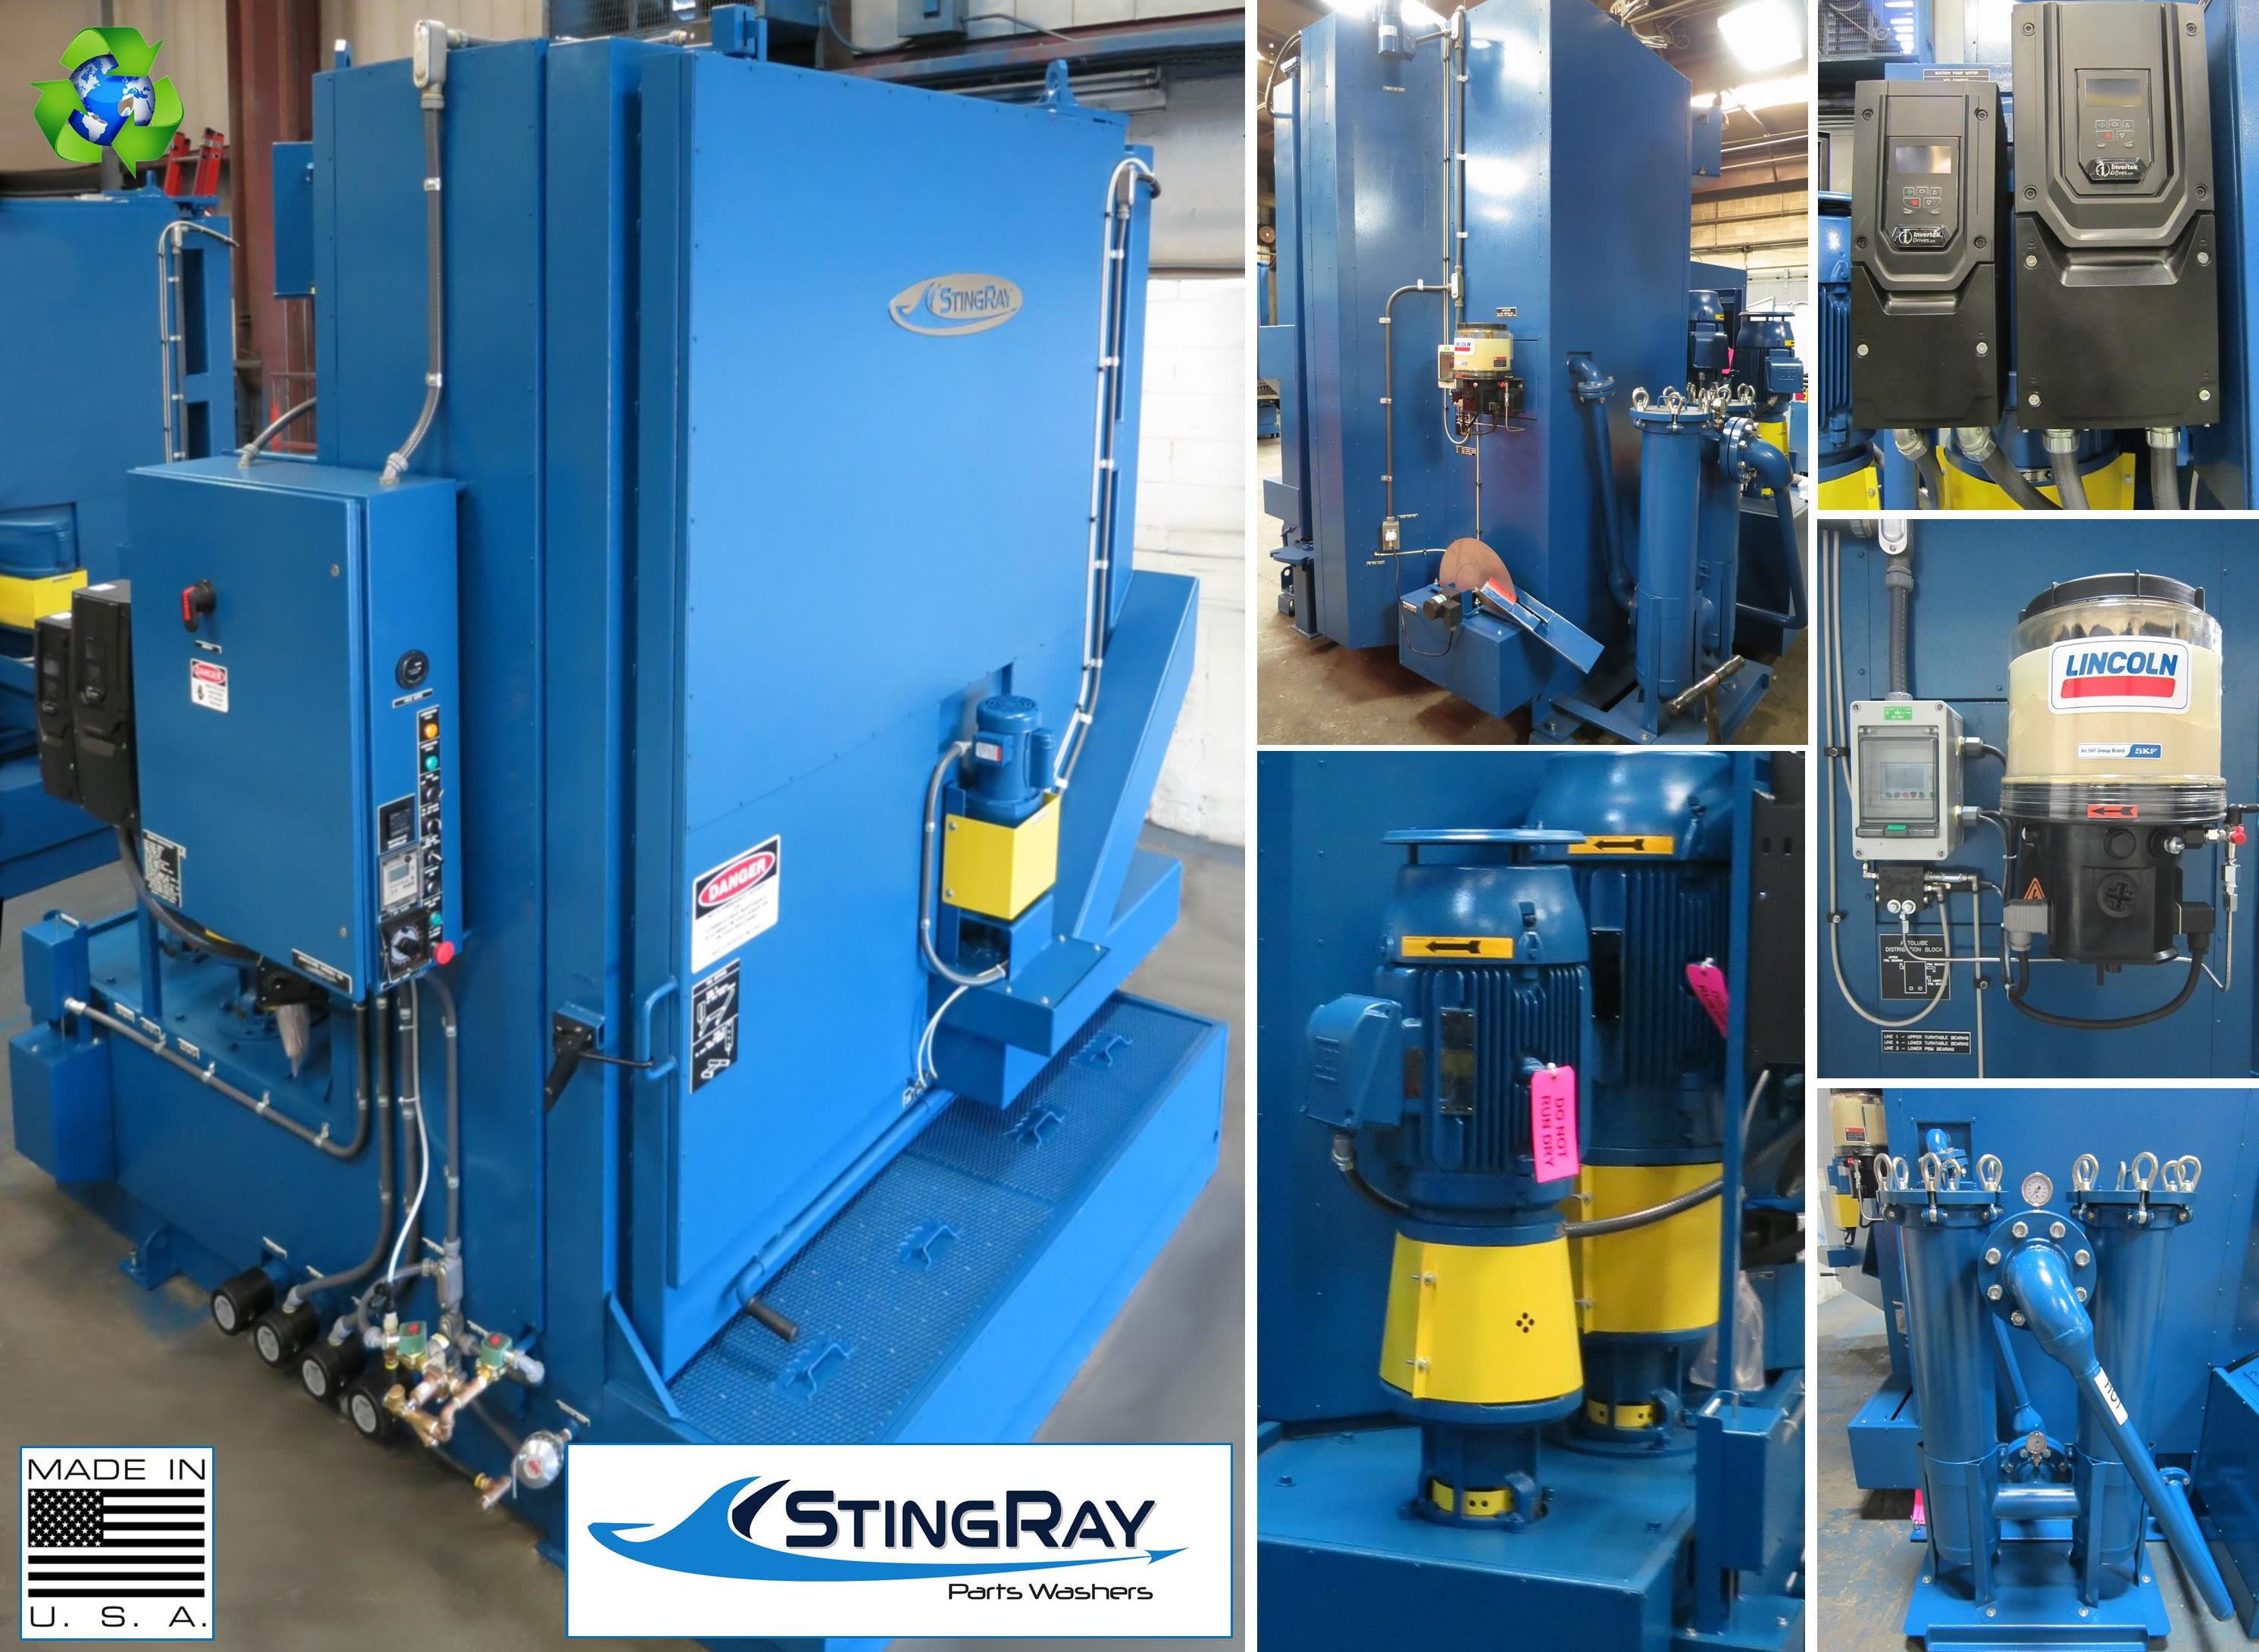 StingRay Industrial Parts Washer for Mining Equipment Engine Rebuilding